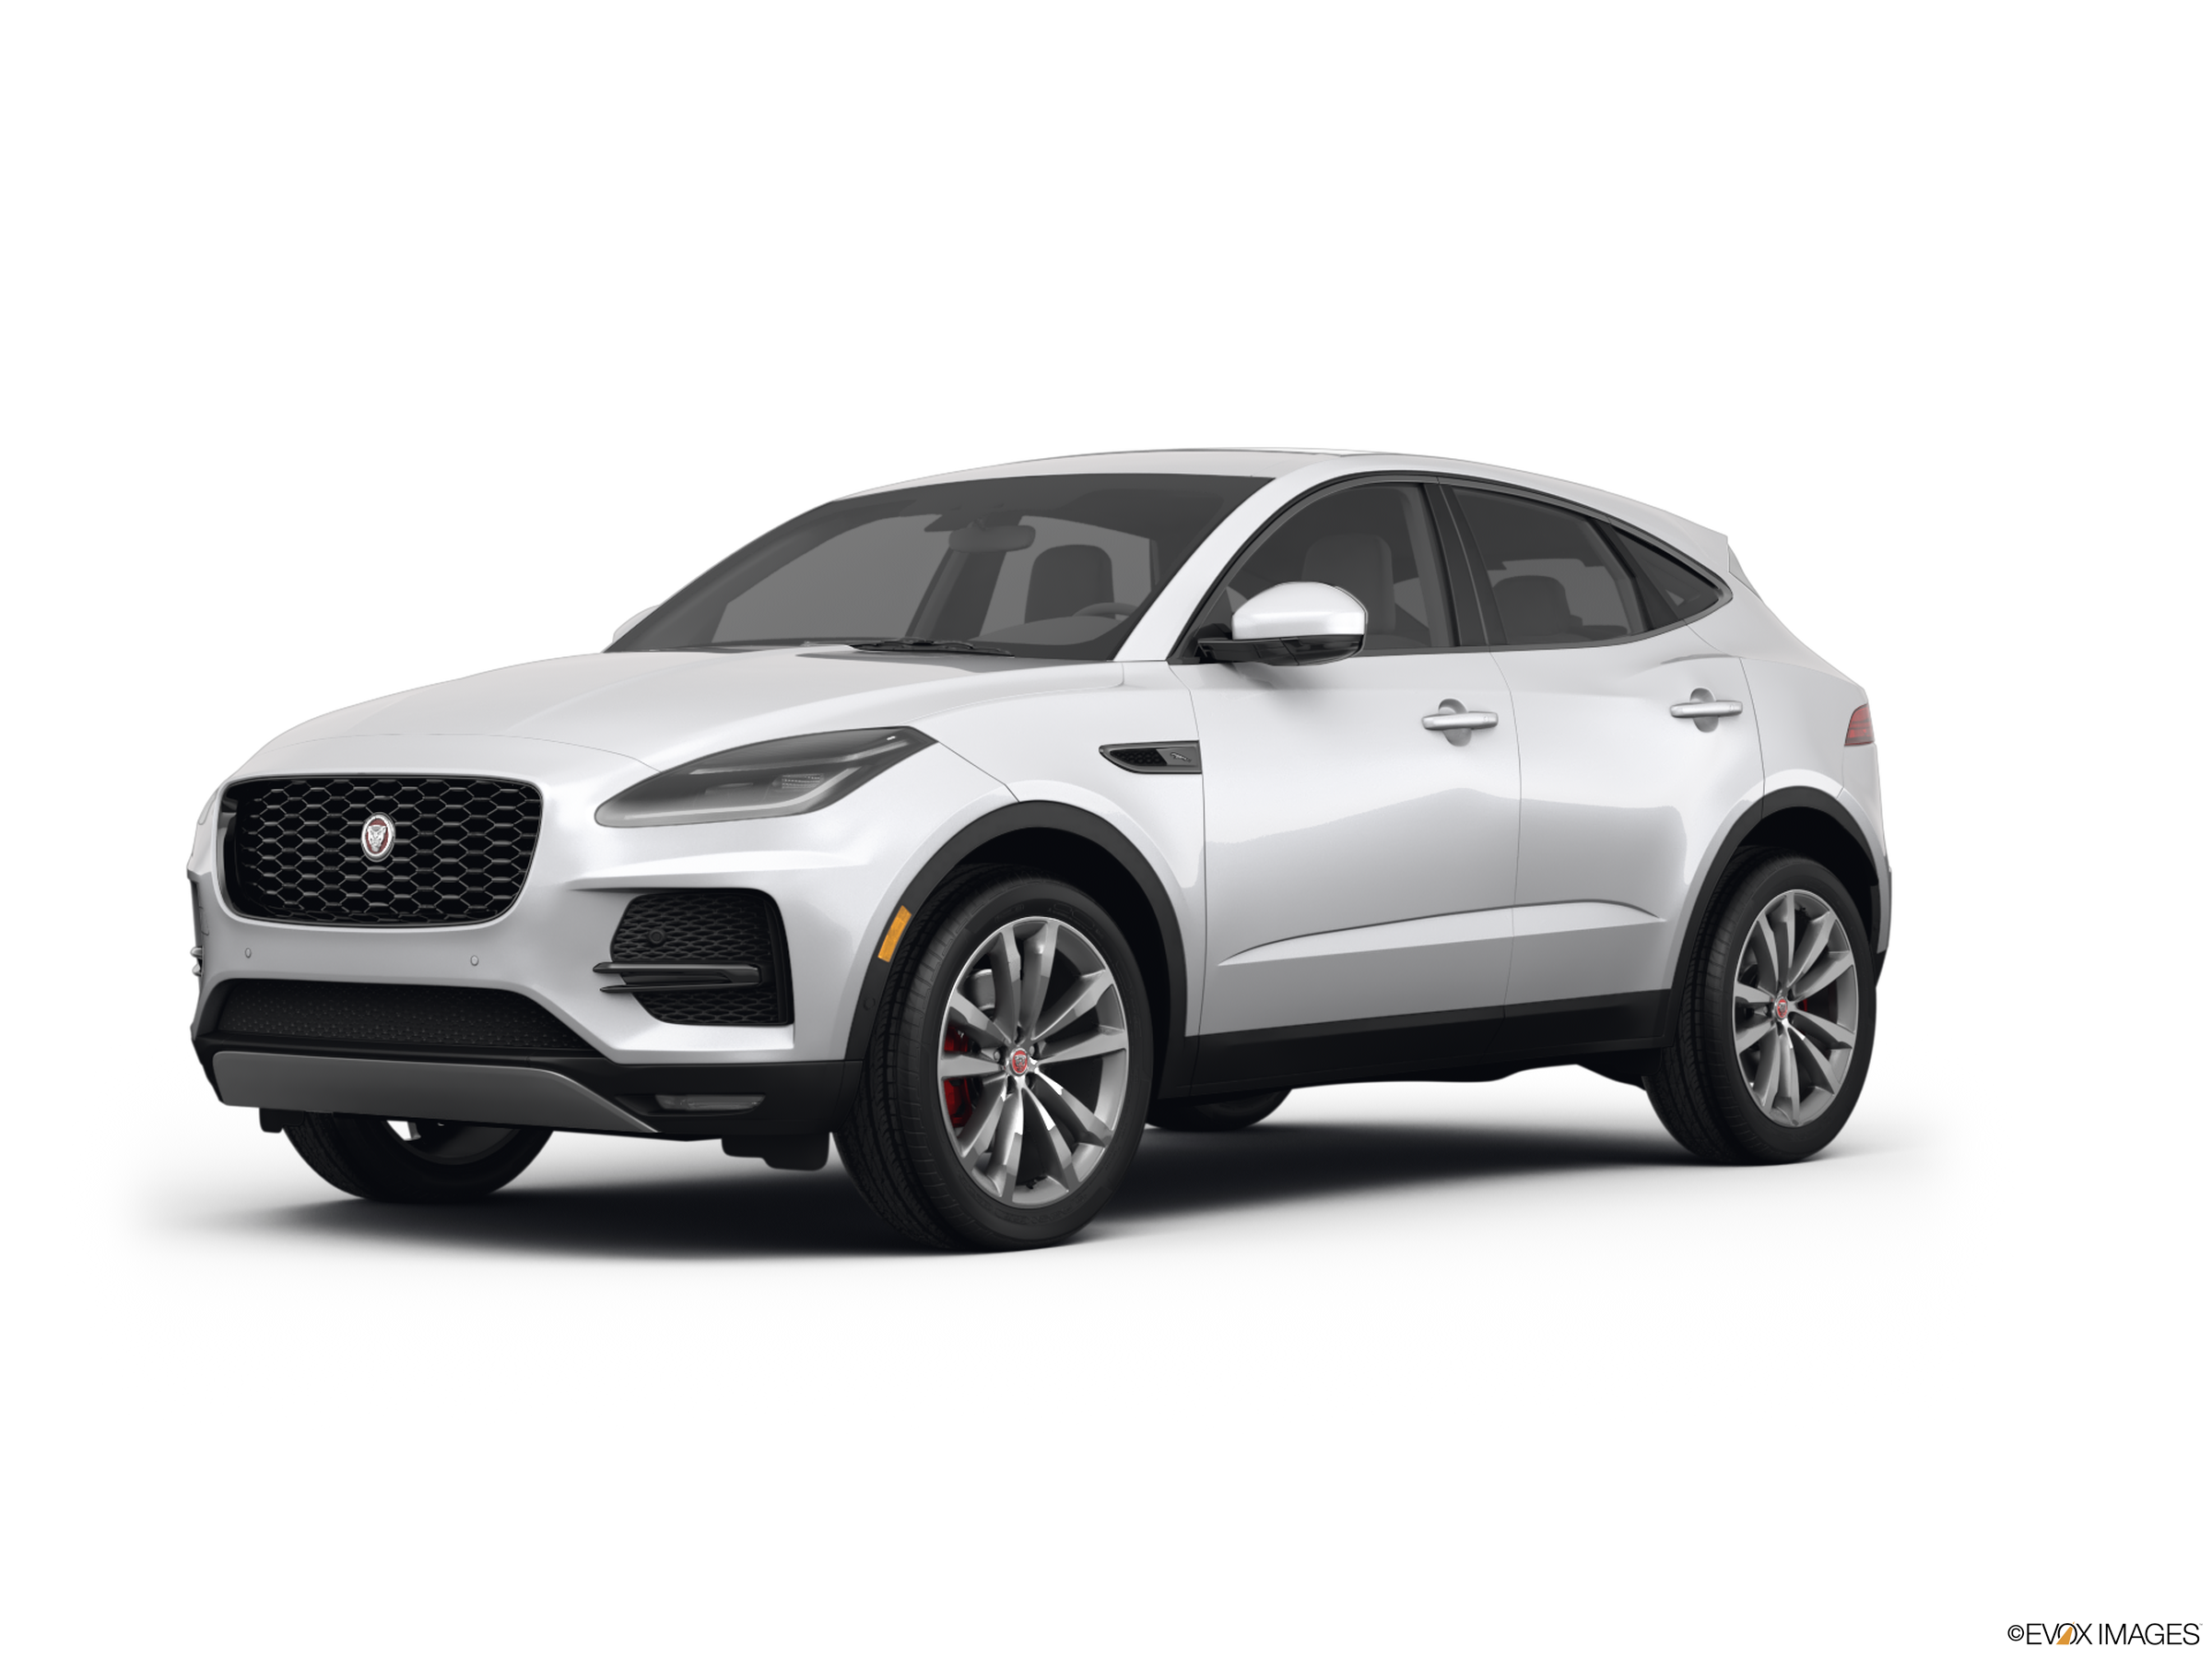 2023 Jaguar E-PACE Prices, Reviews, and Photos - MotorTrend